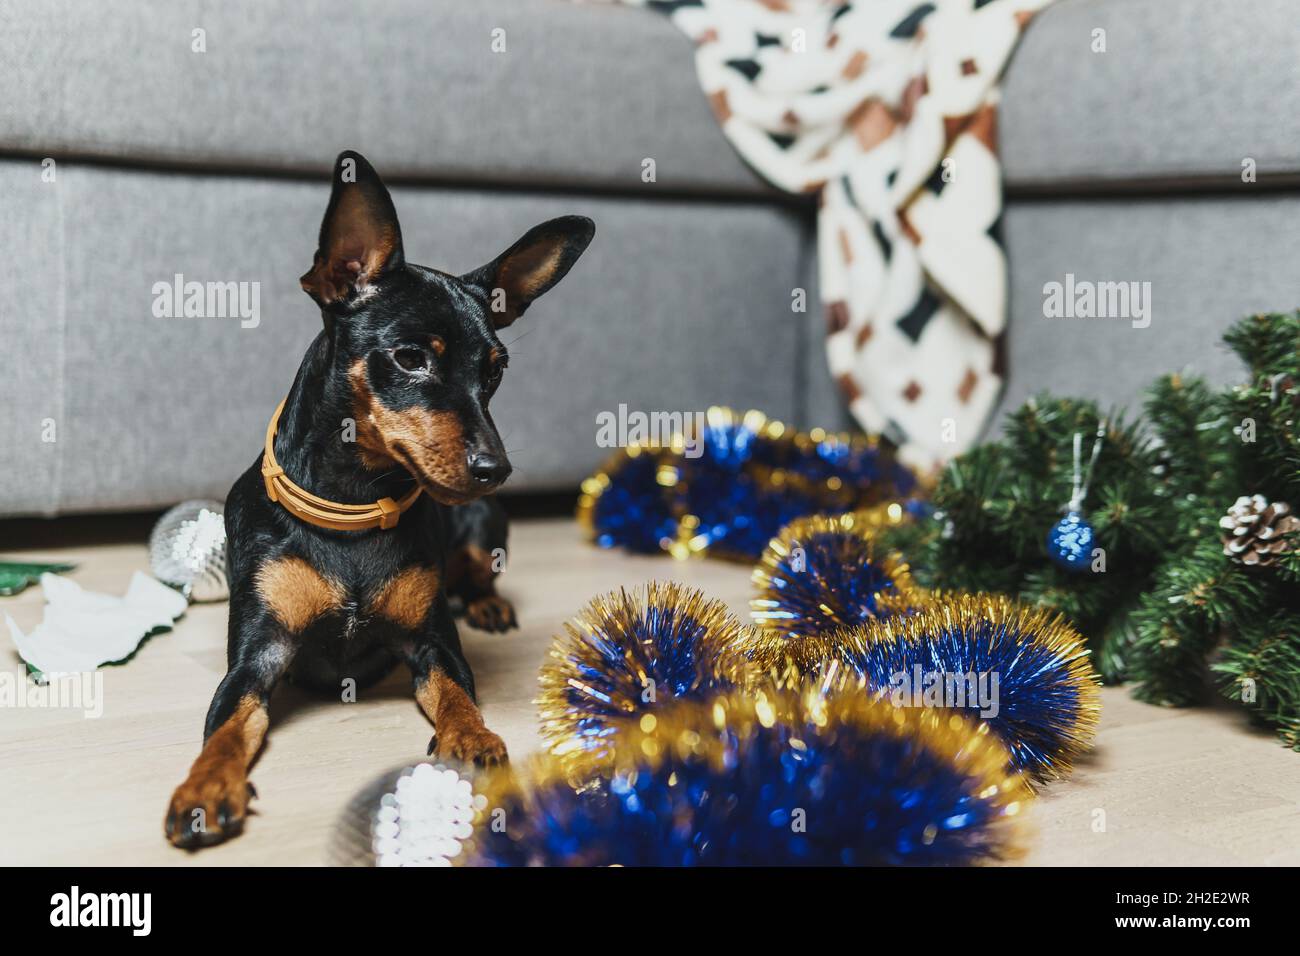 Funny dog miniature pinscher made a mess in the room and play with Christmas tree. Puppy at home alone. Lonely pets concept Stock Photo